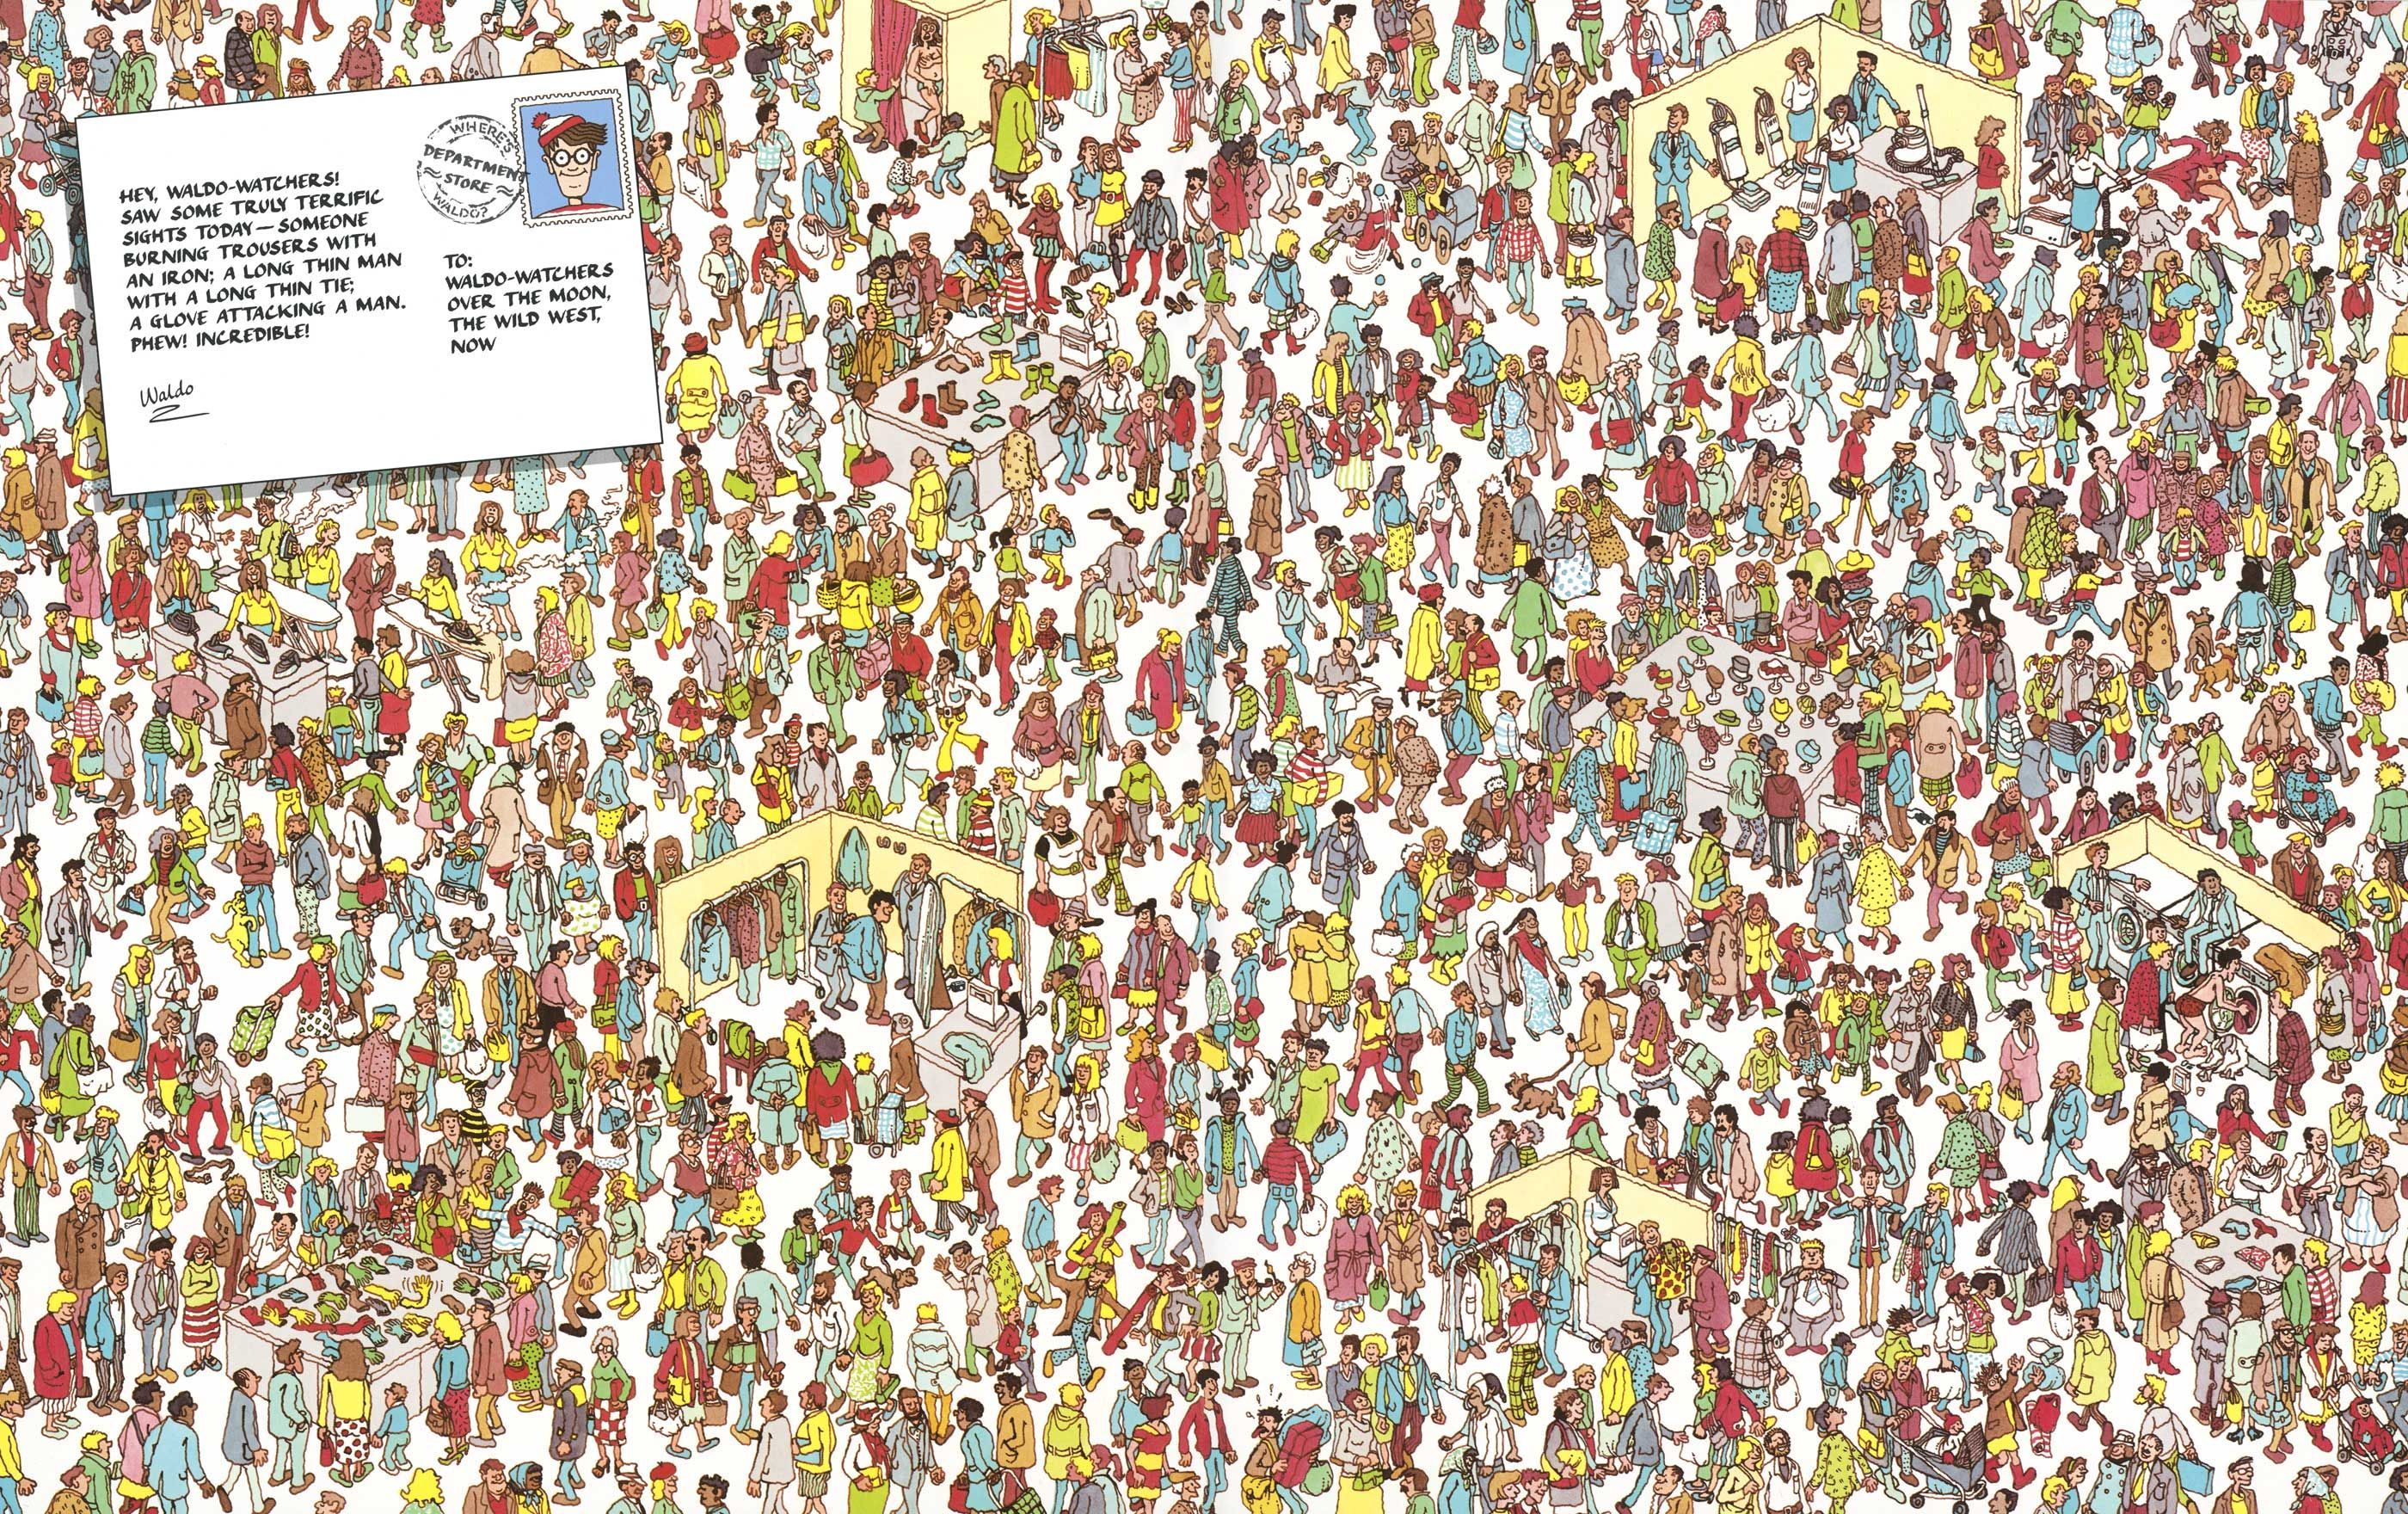 Extremely Hard Where Is Waldo HD Wallpaper. Wheres waldo, Wheres wally, Where's waldo picture